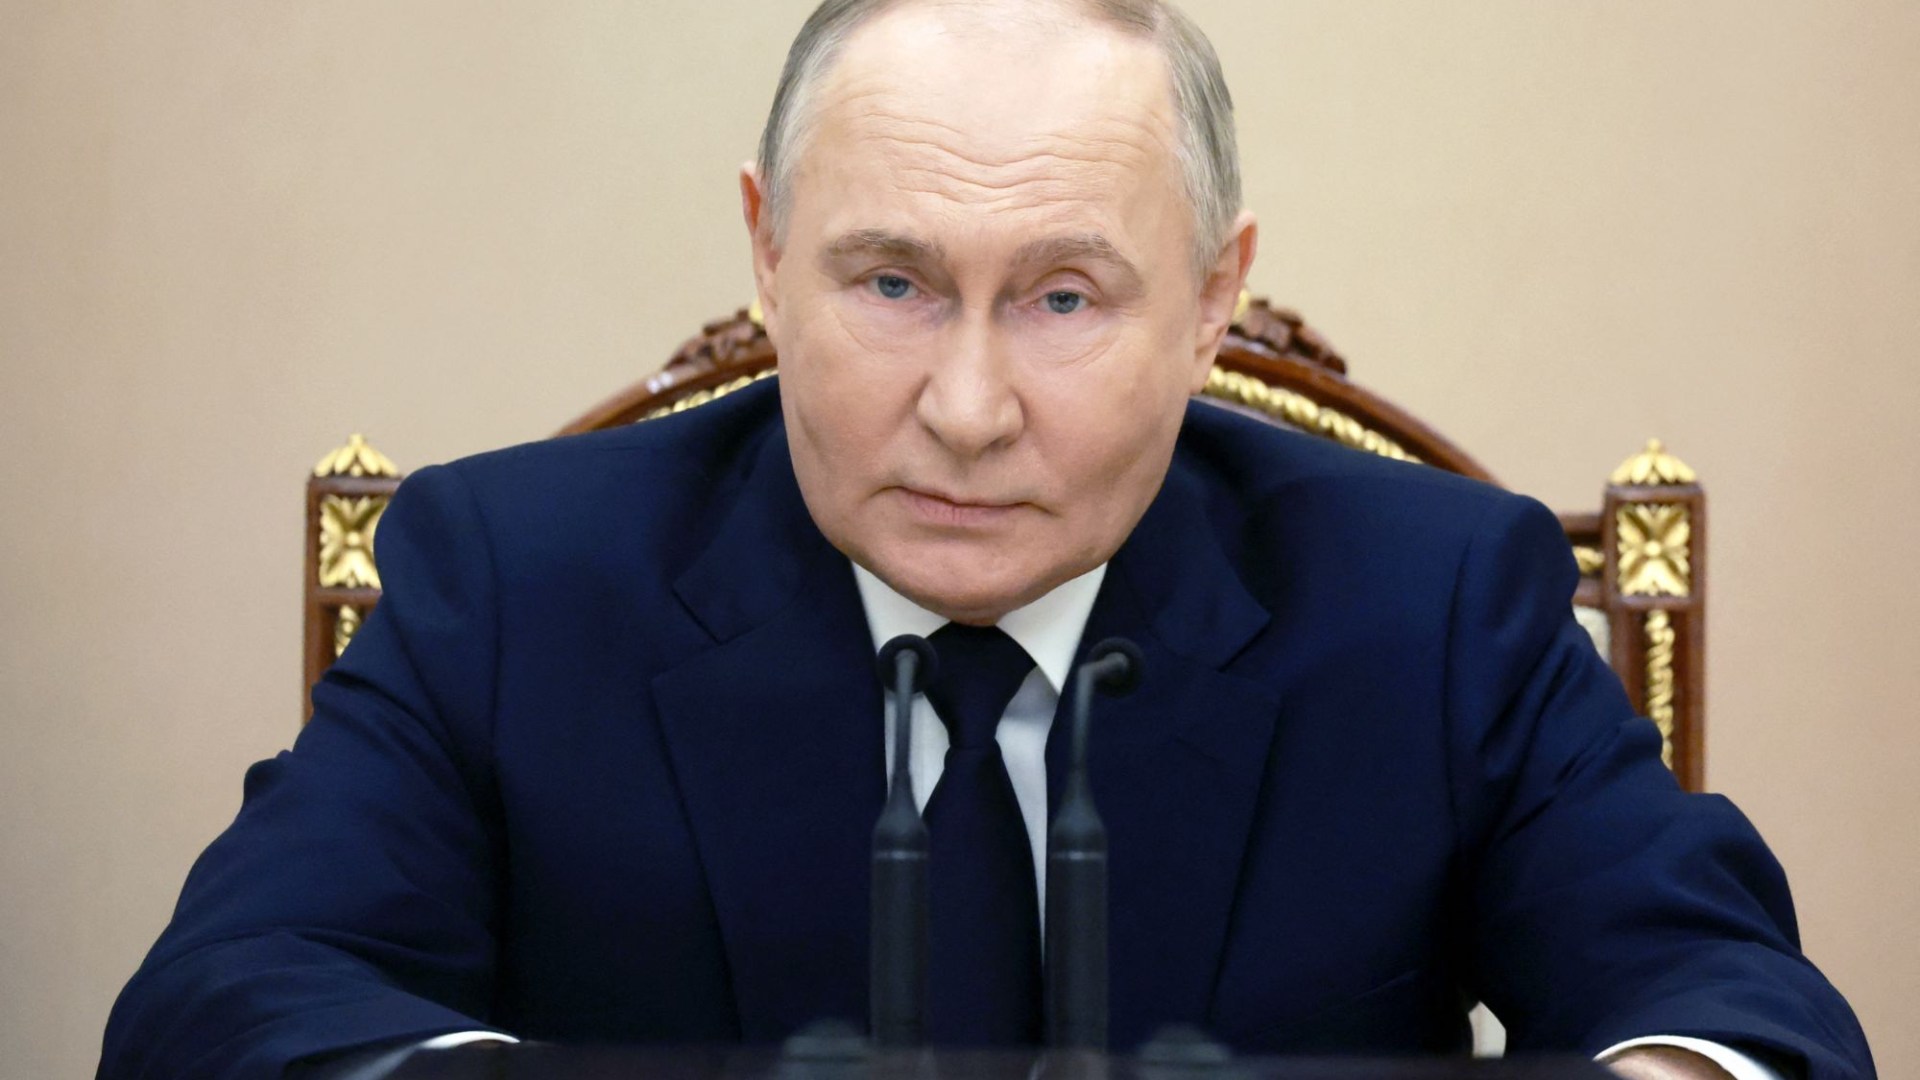 Putin is expanding sea border in push to seize nuclear launch pad island in first step toward WW3, ex-Generals warn [Video]